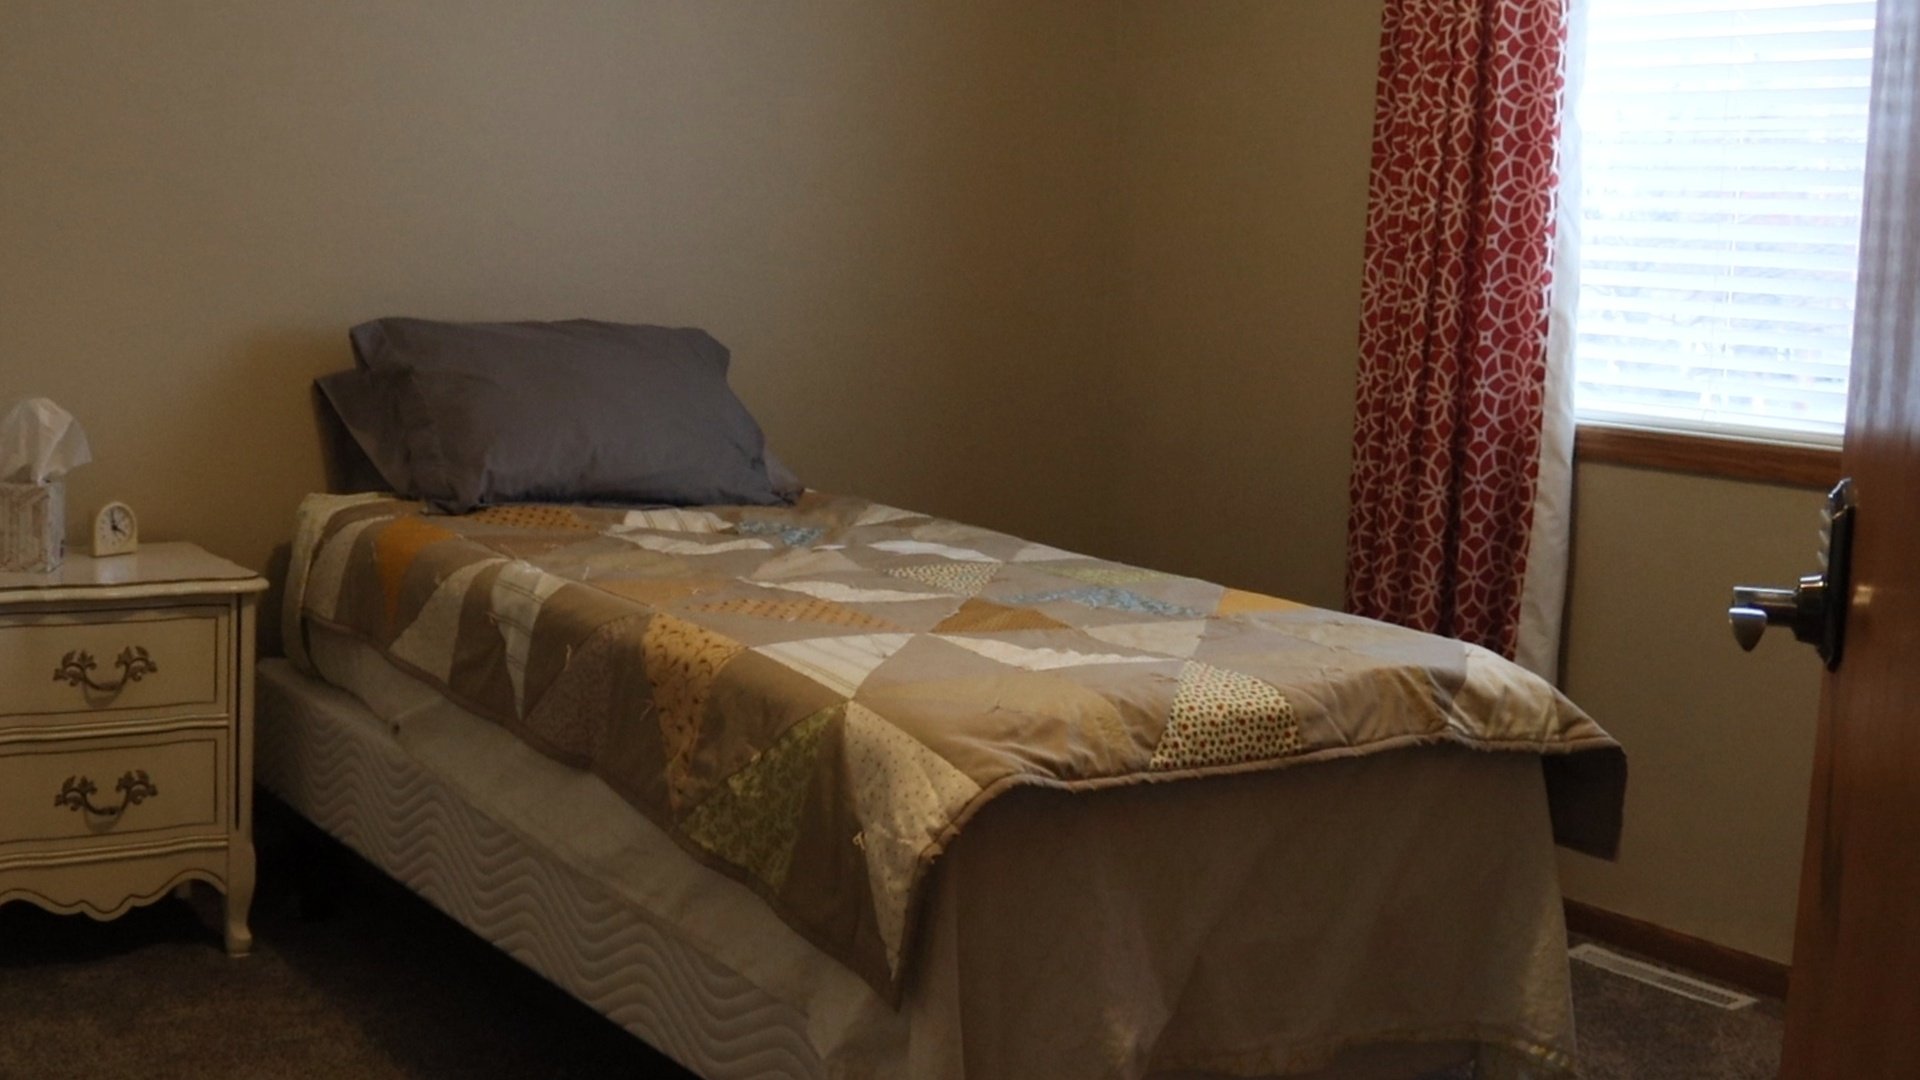   Each resident of Valley Lake II has a private bedroom for the duration of their stay.  